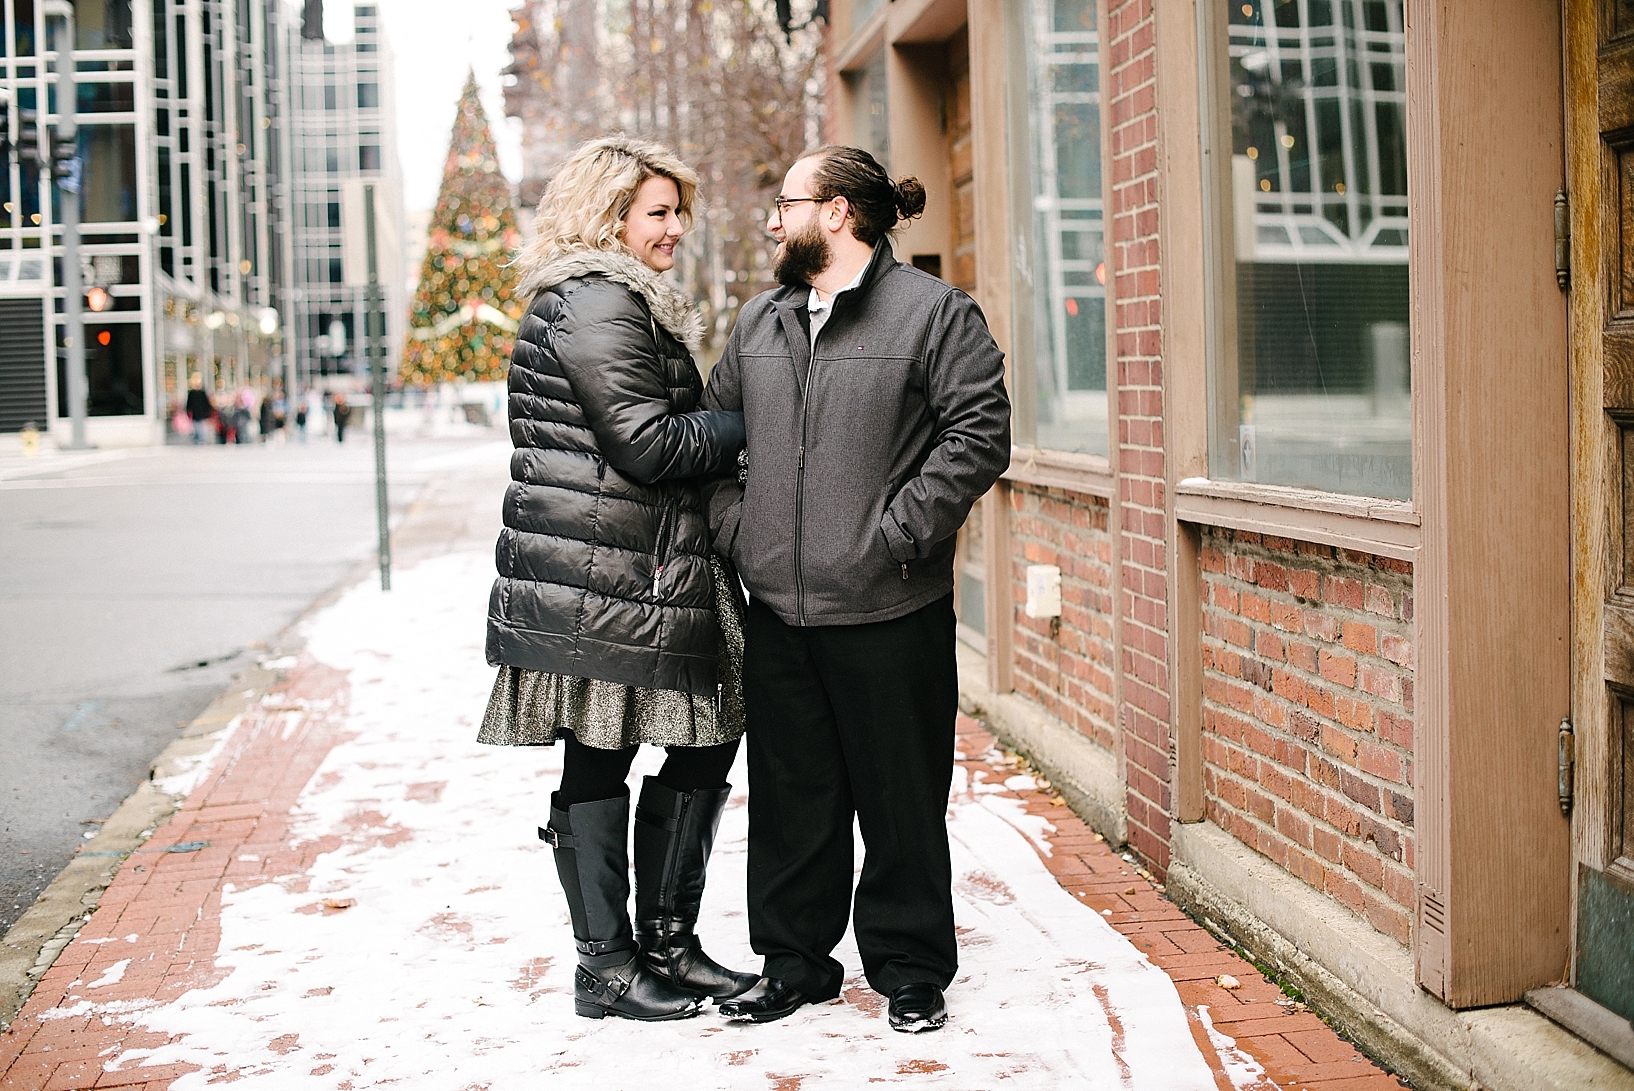 couple wearing winter coats standing on city sidewalk covered in snow